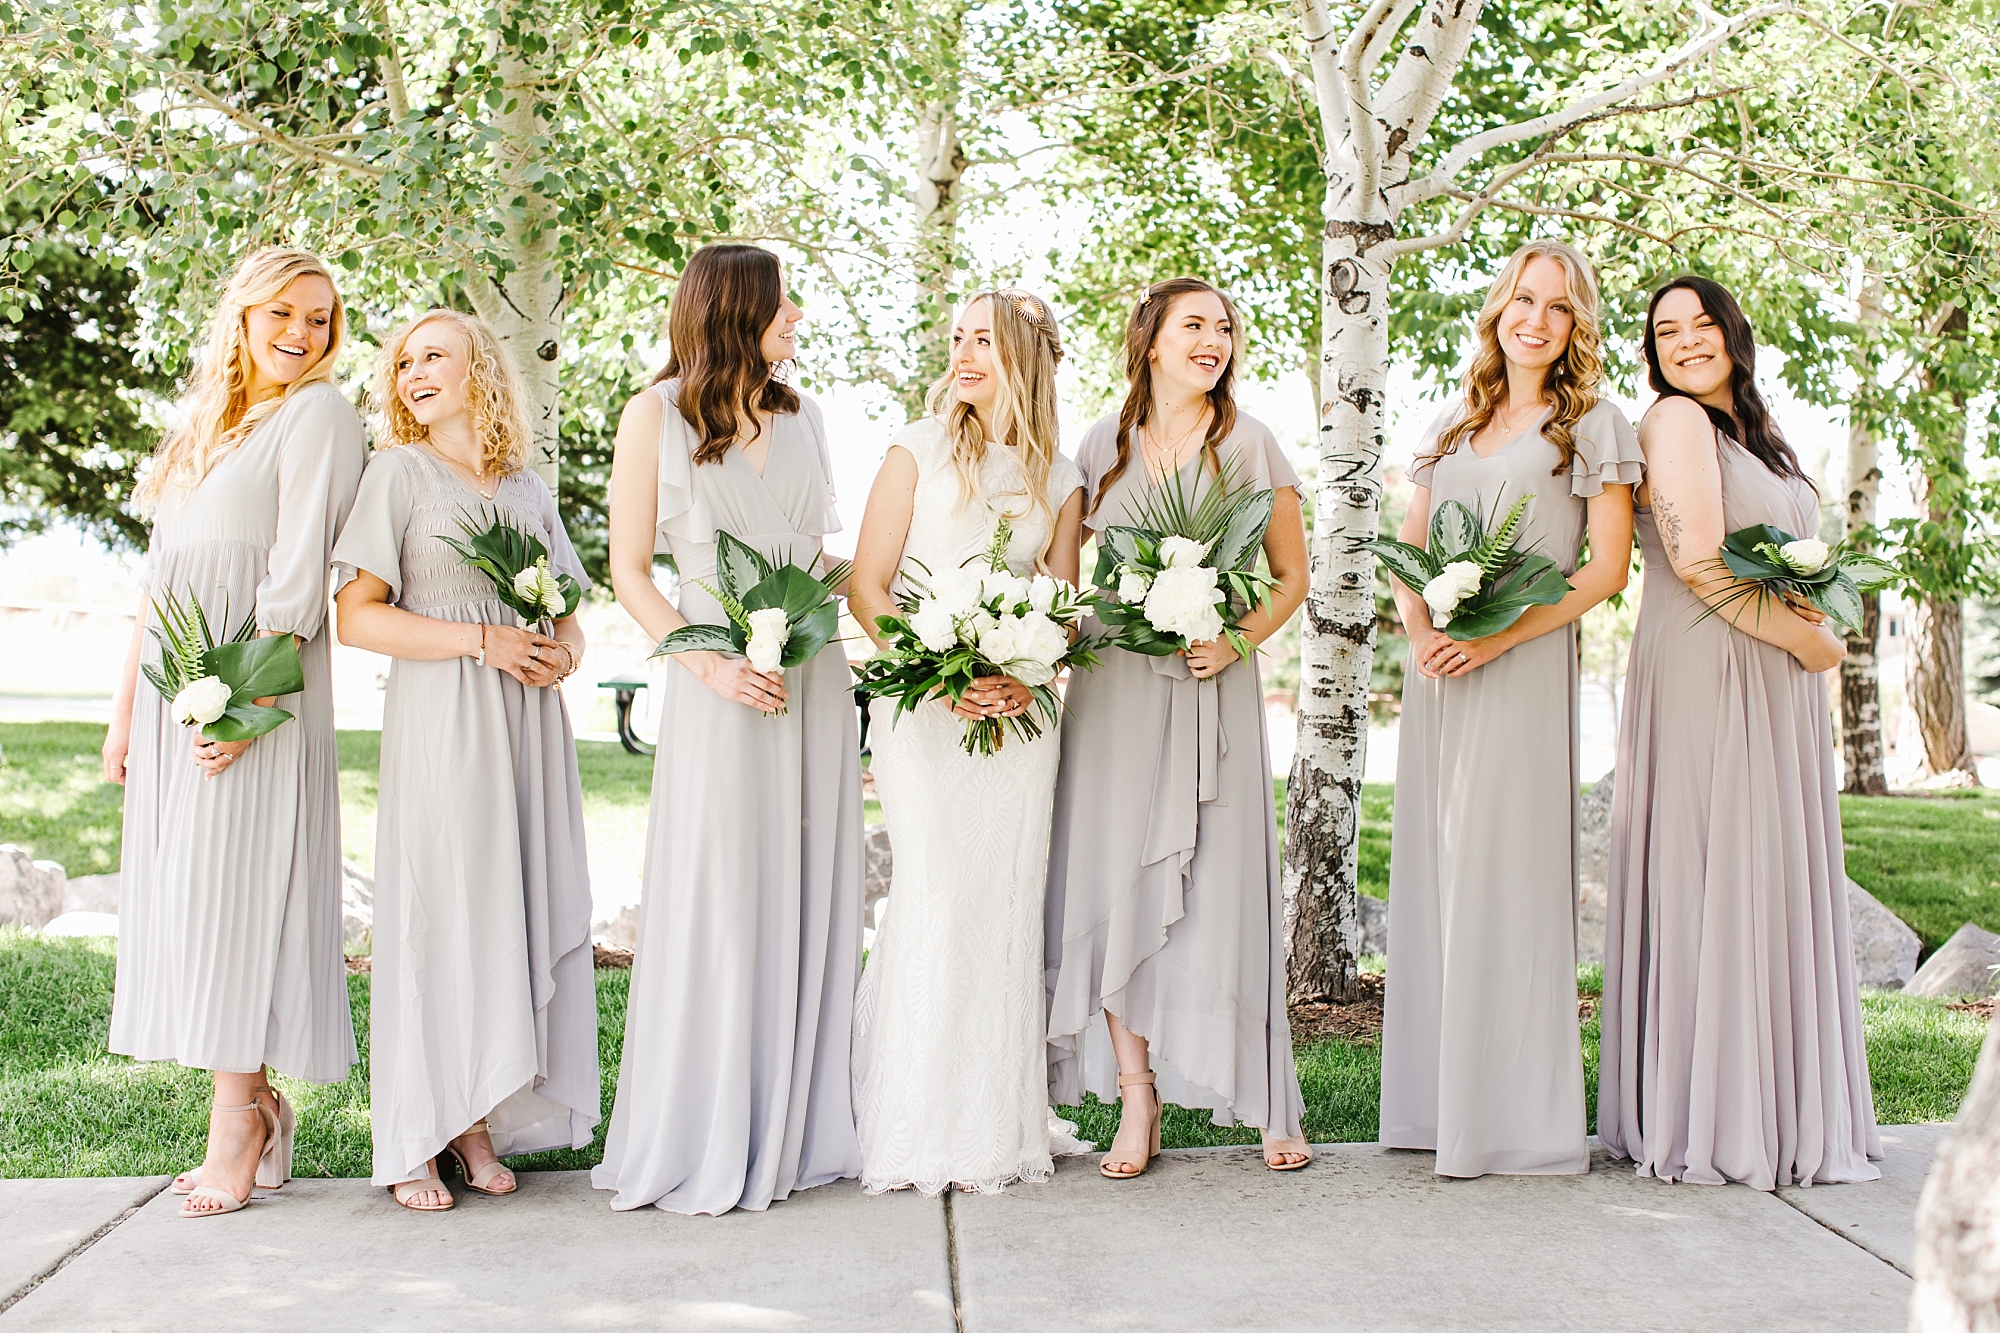 Dove Gray bridesmaids dresses and tropical bouquets